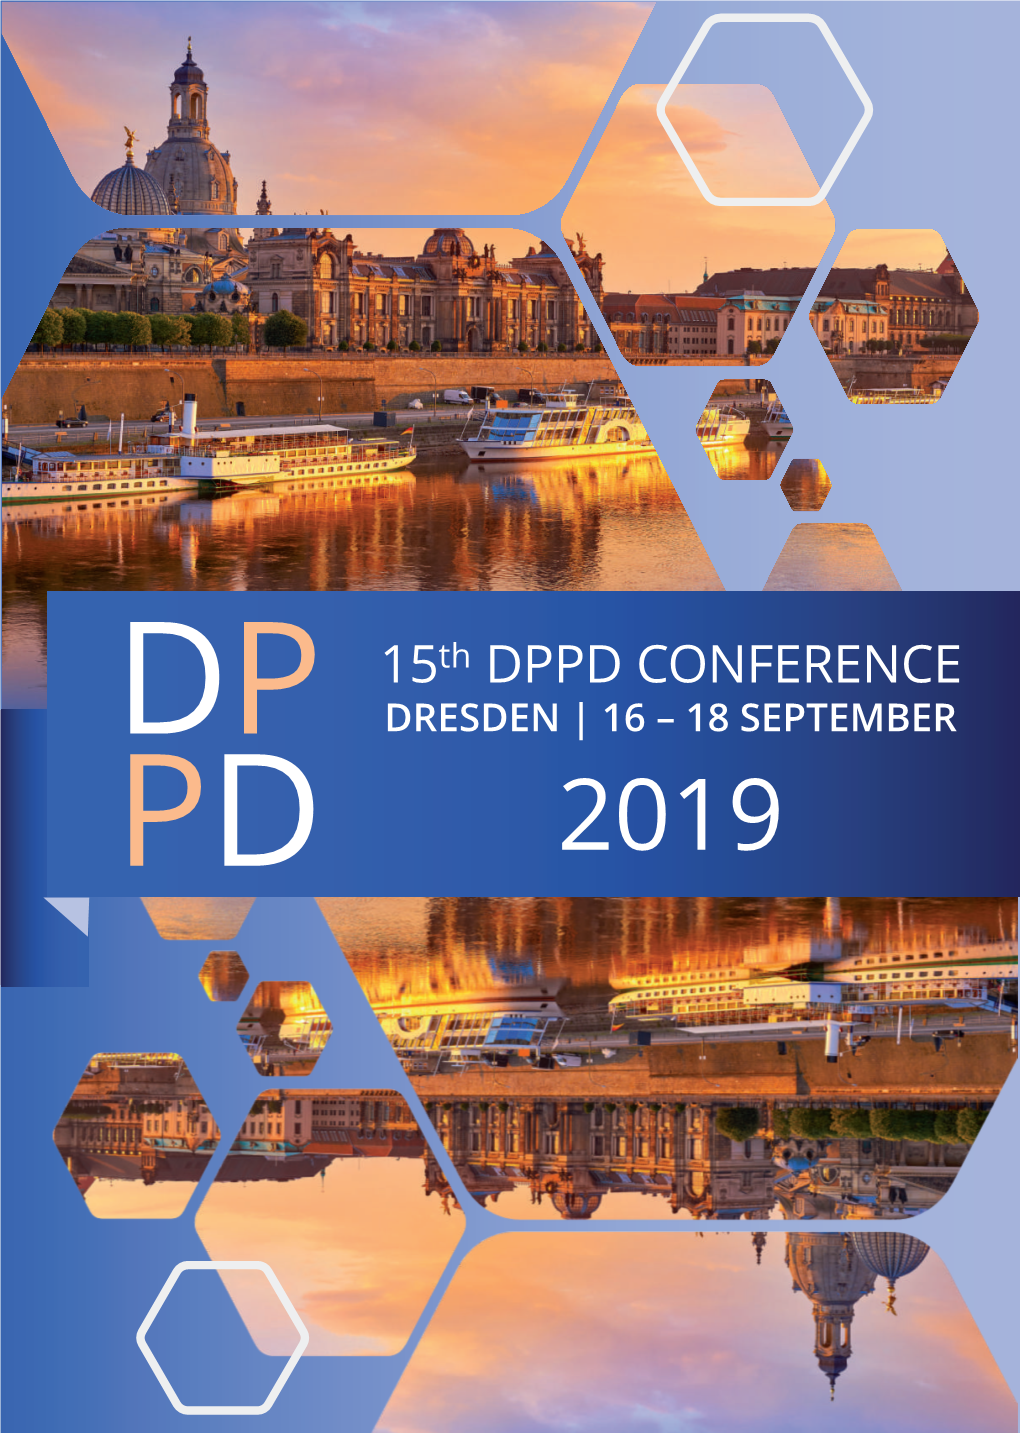 15Th DPPD CONFERENCE DP DRESDEN | 16 – 18 SEPTEMBER PD 2019